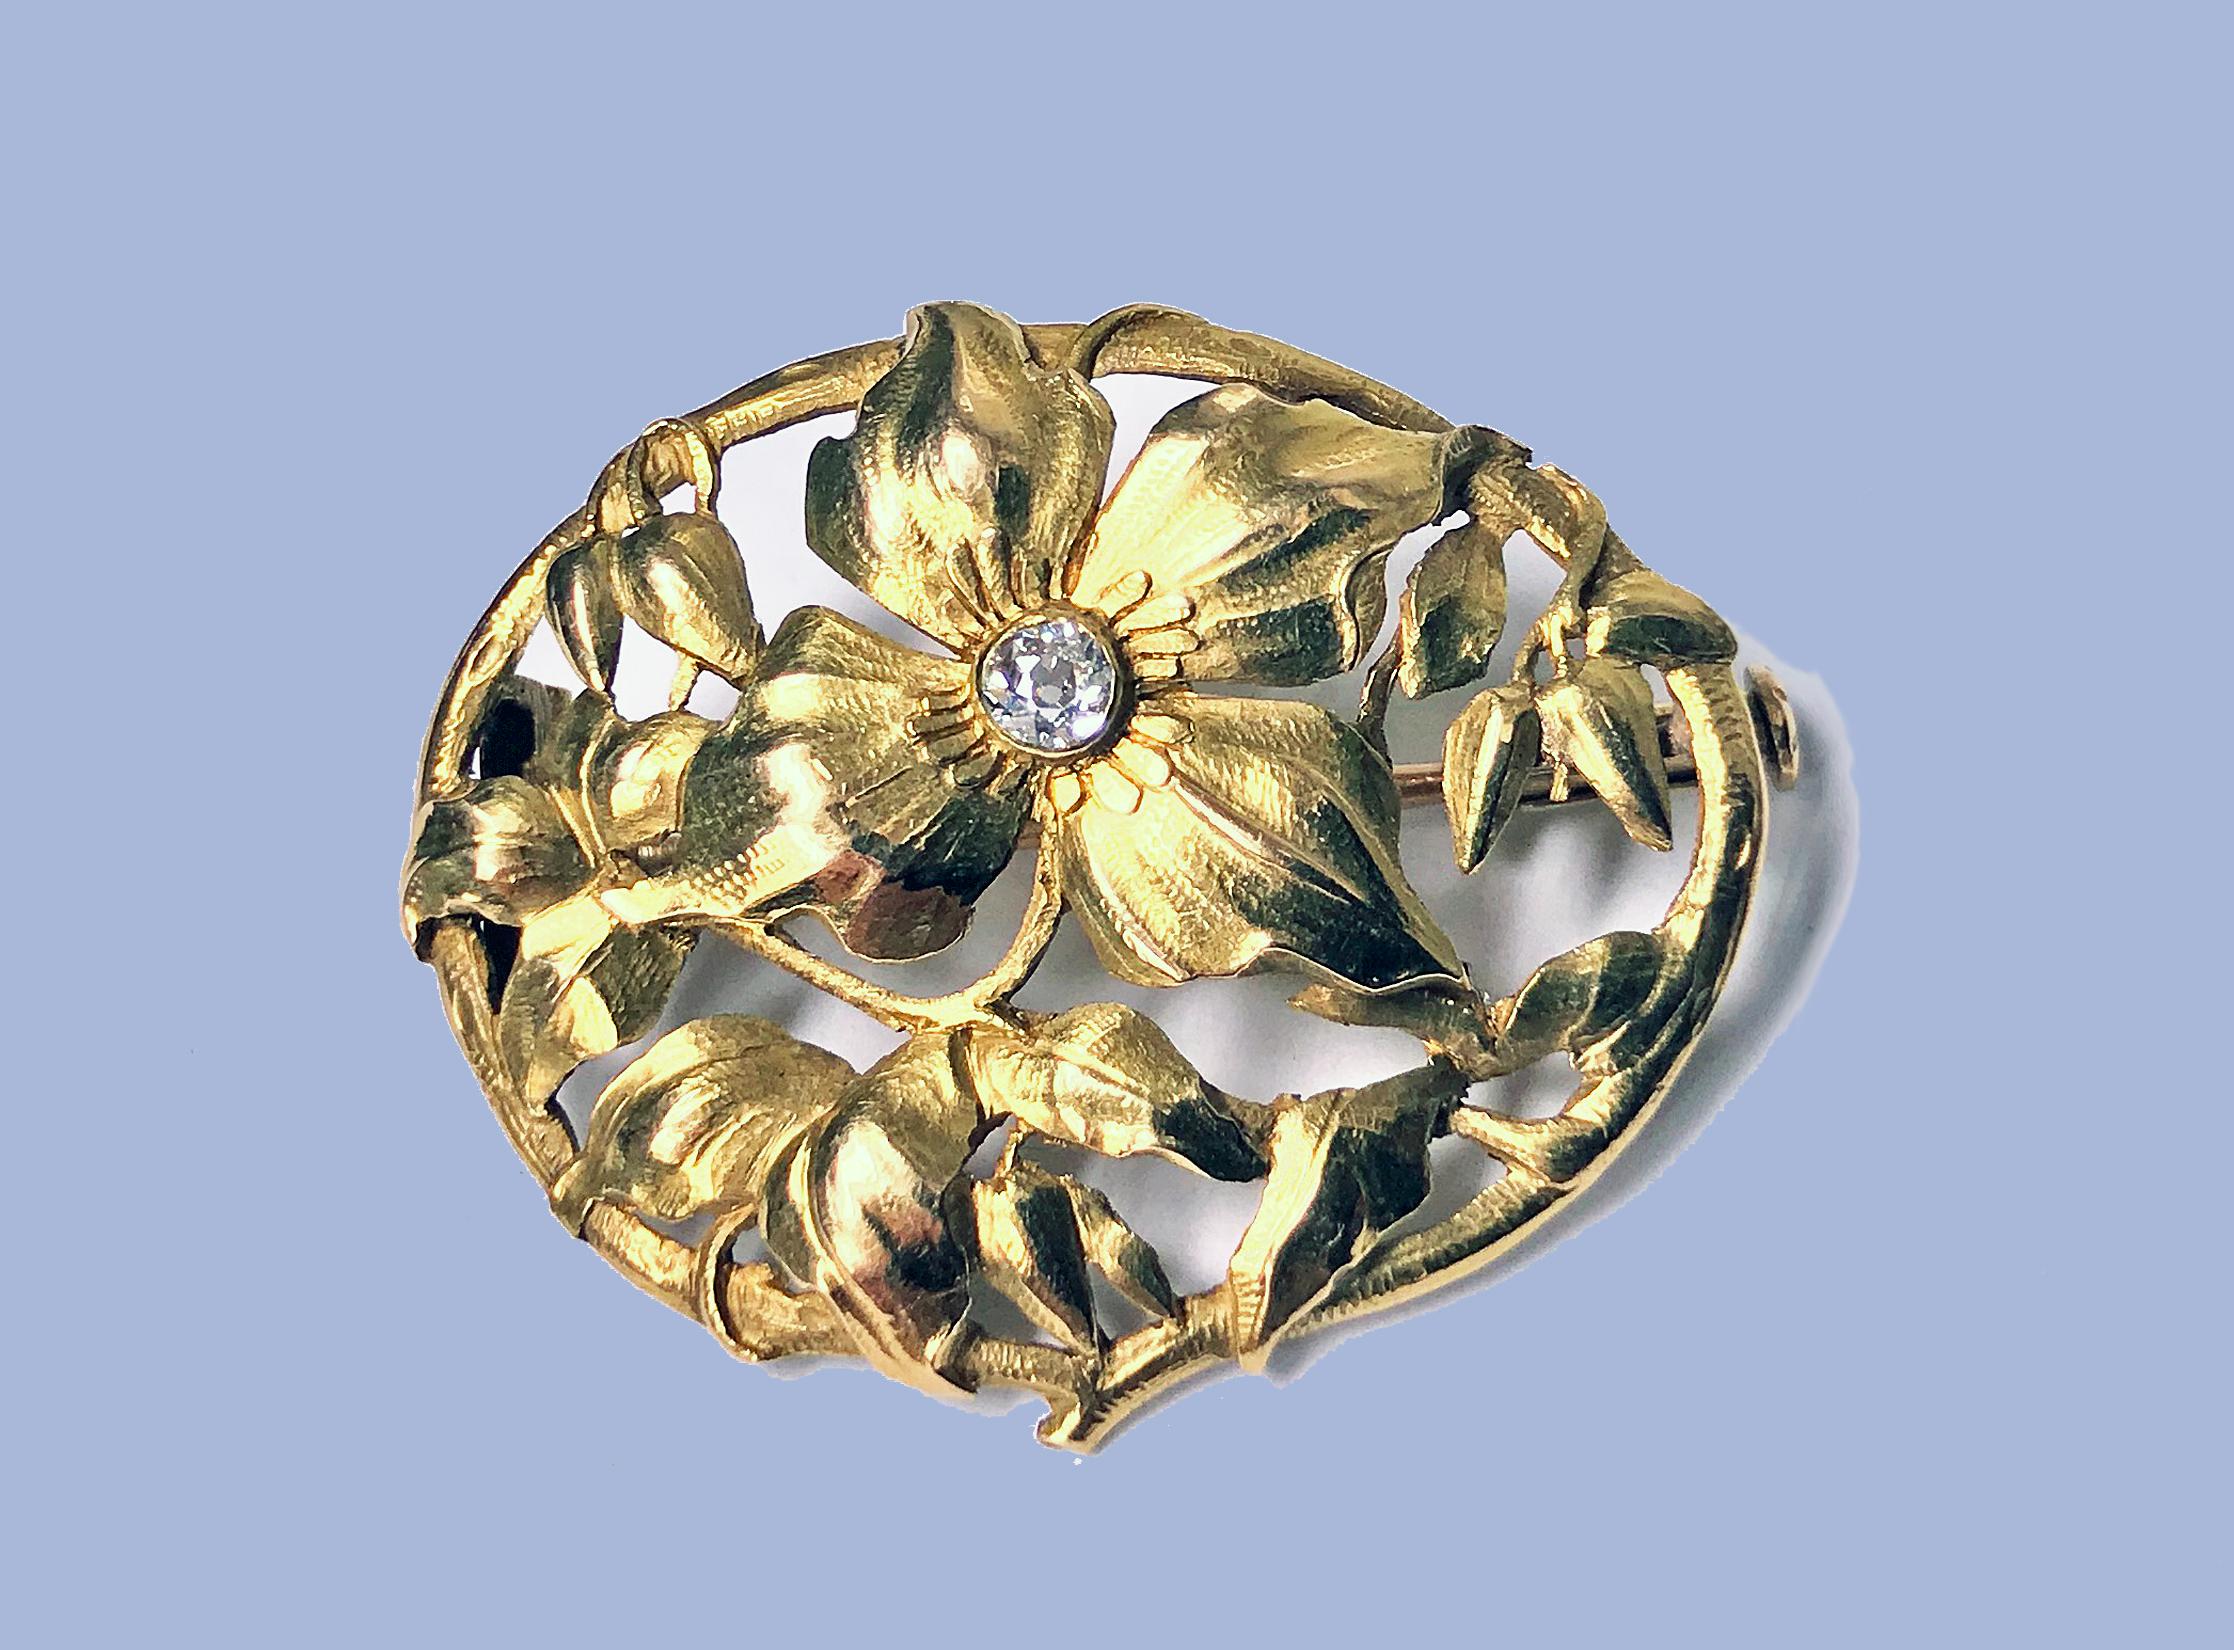 Art Nouveau 18K Diamond Brooch, C.1900. The brooch of oval pierced foliate design, the main floral petal set in the centre with a small old cut diamond. Trombone clasp to reverse. Measures: 3.00 x 2.00 cm. Item Weight: 4.30 grams. Acid tested 18K.